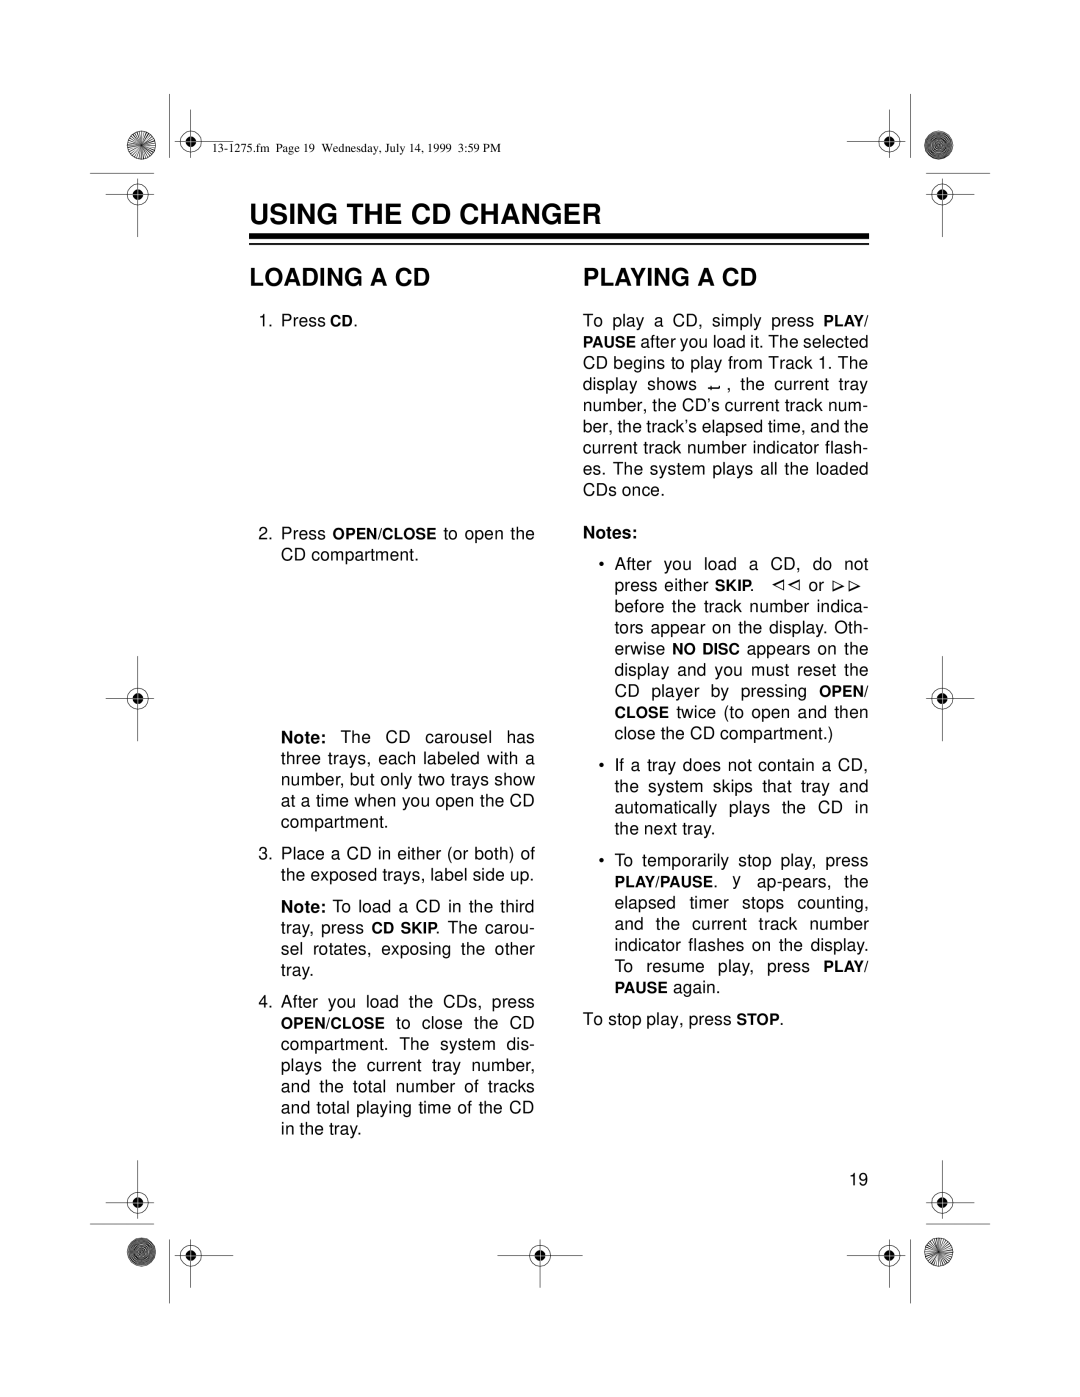 Optimus SYSTEM 728 owner manual Using The Cd Changer, Loading A Cd, Playing A Cd 